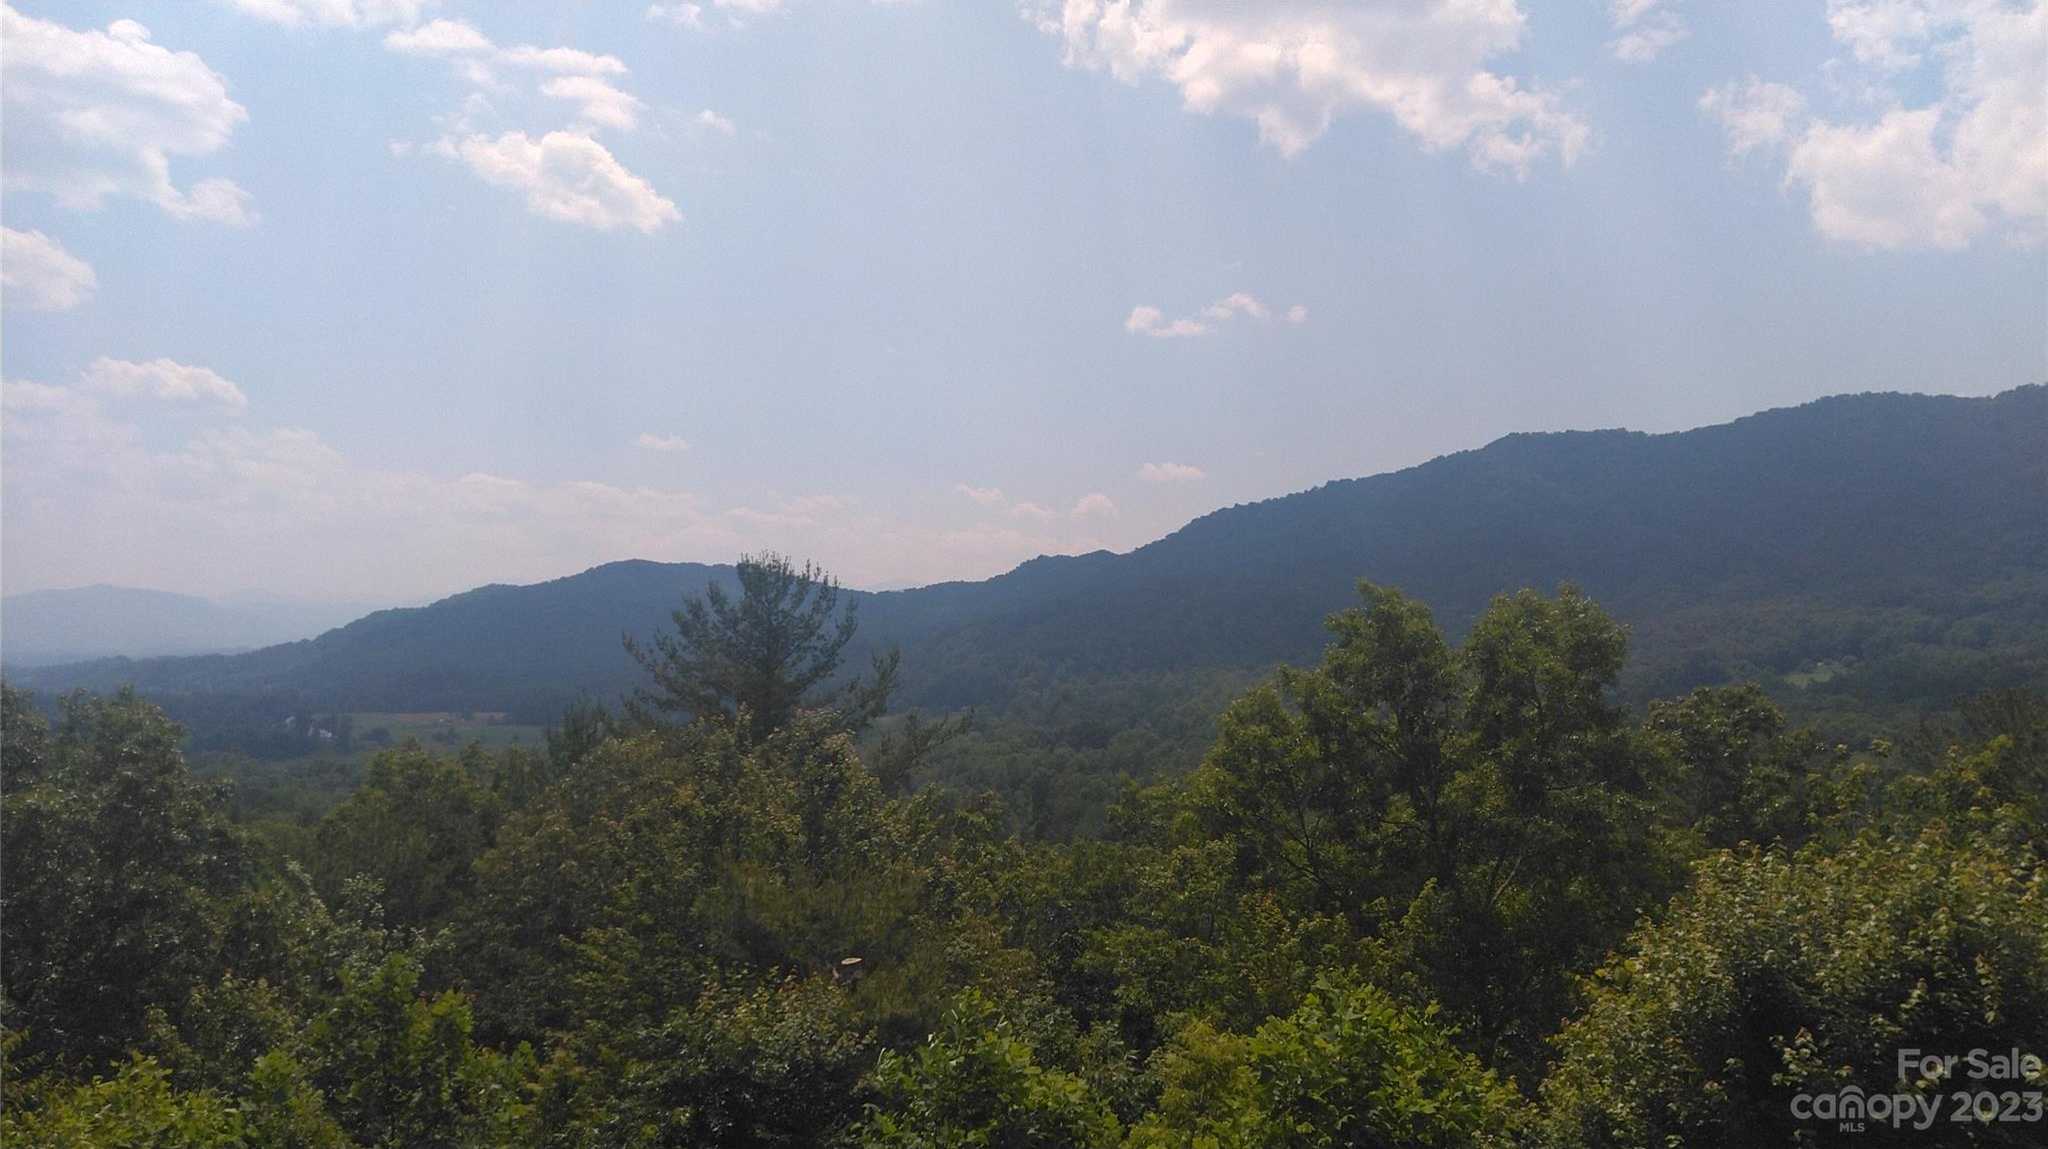 View Marion, NC 28752 land